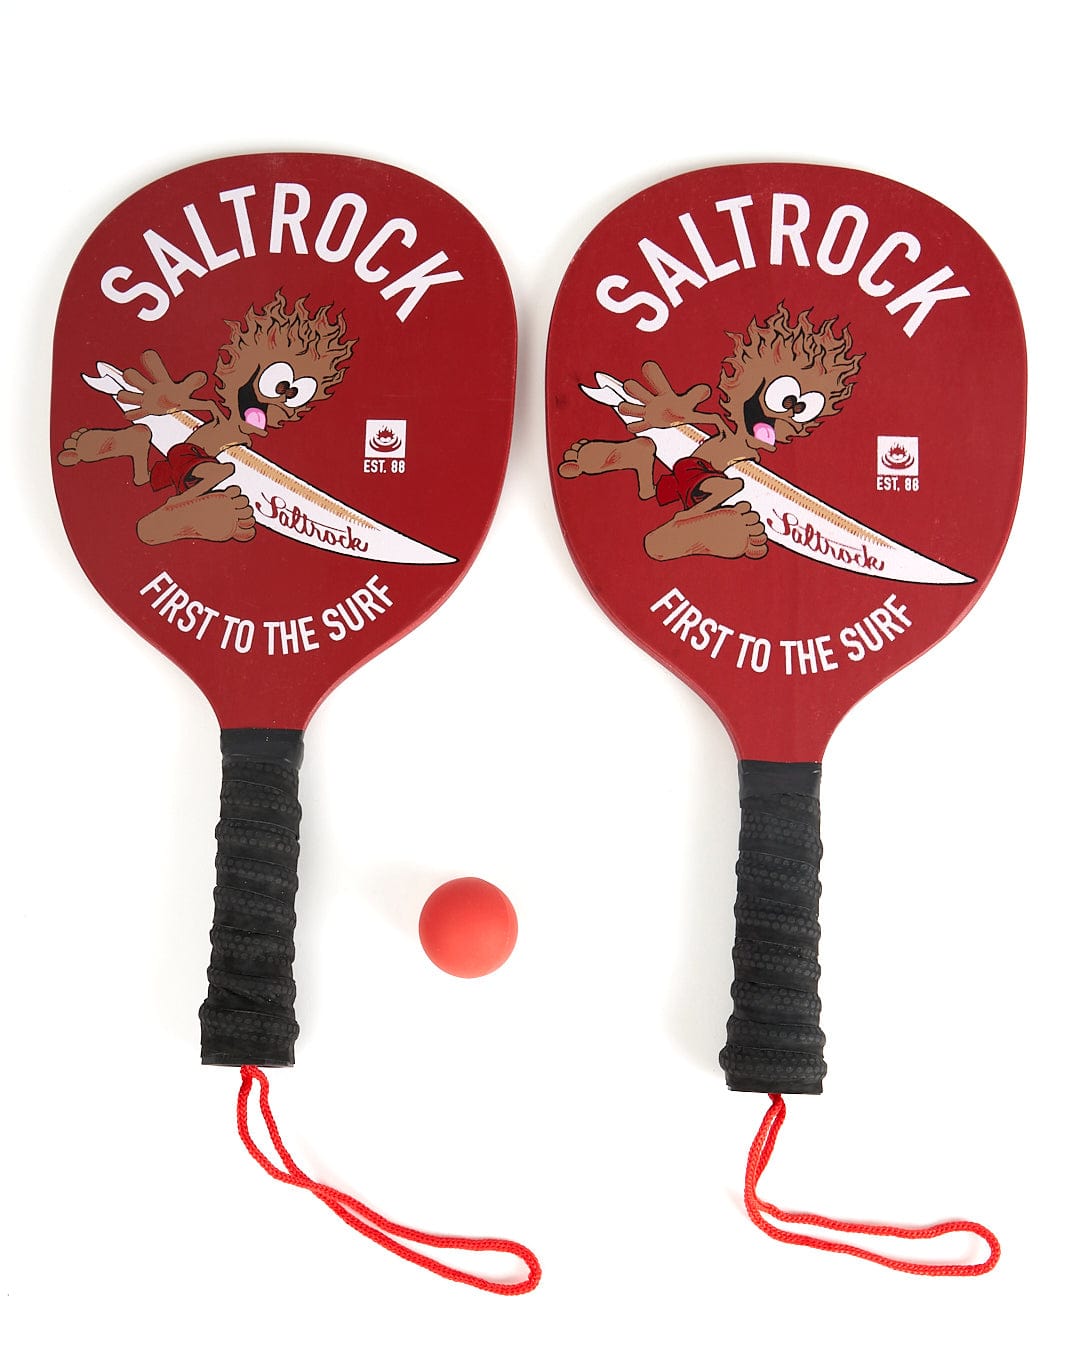 Two paddles with the word Saltrock on them.